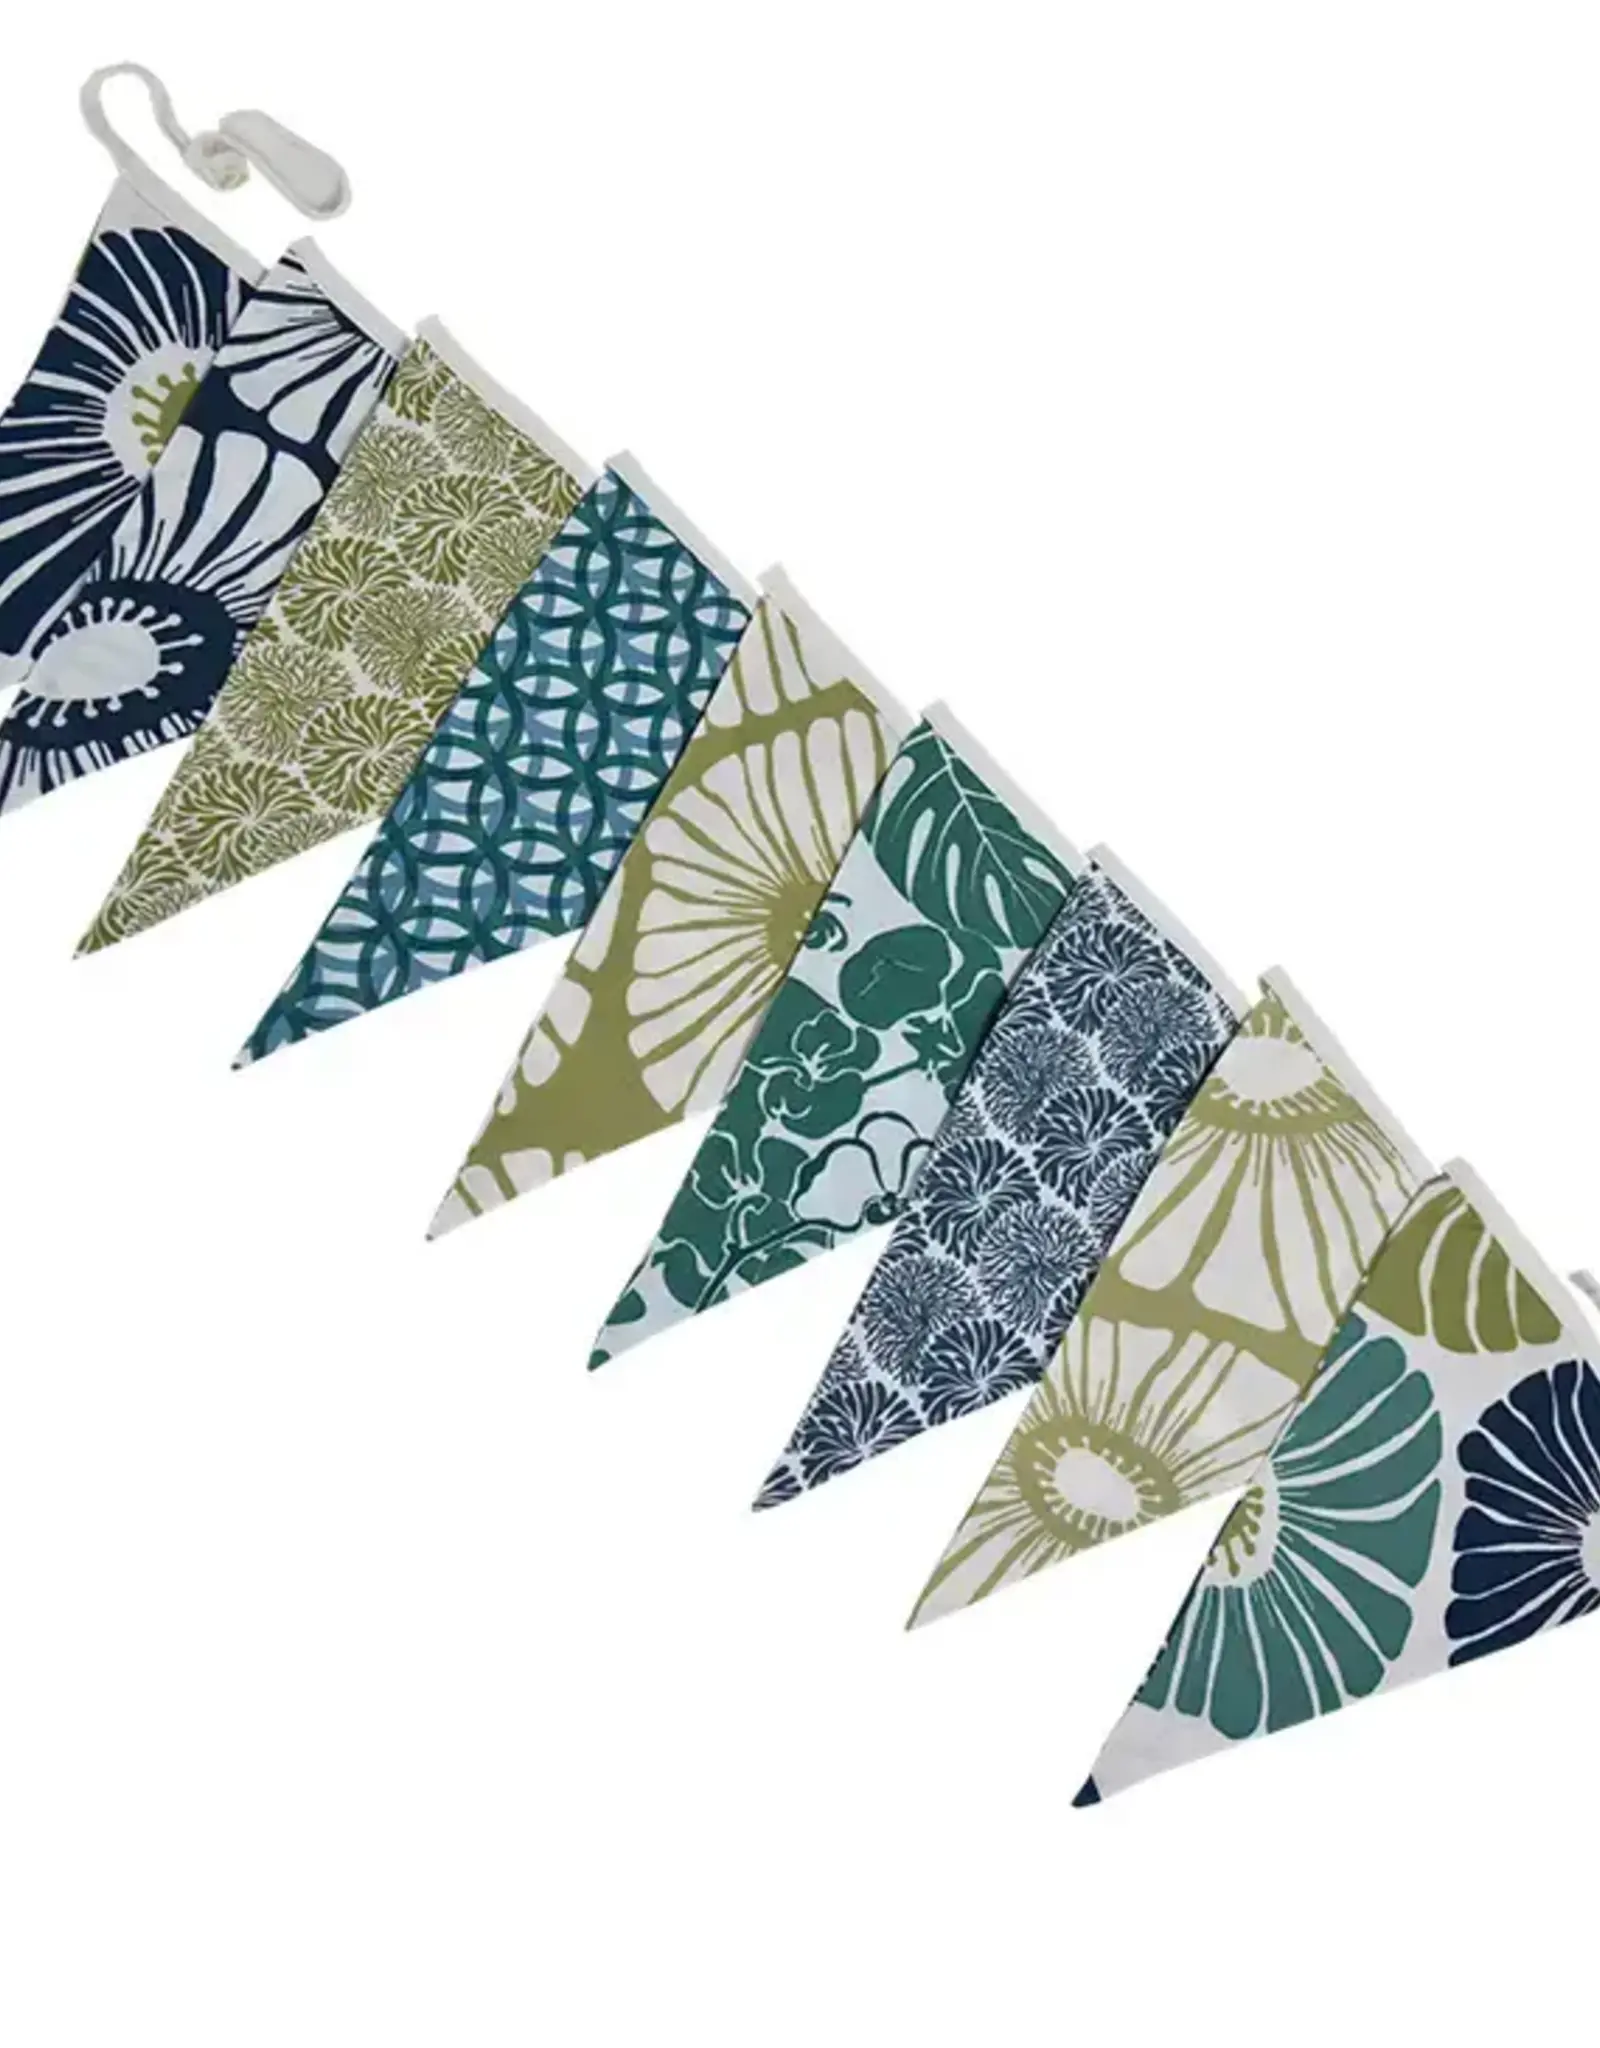 Balizen Bunting Banner Flags (Green and Blue)